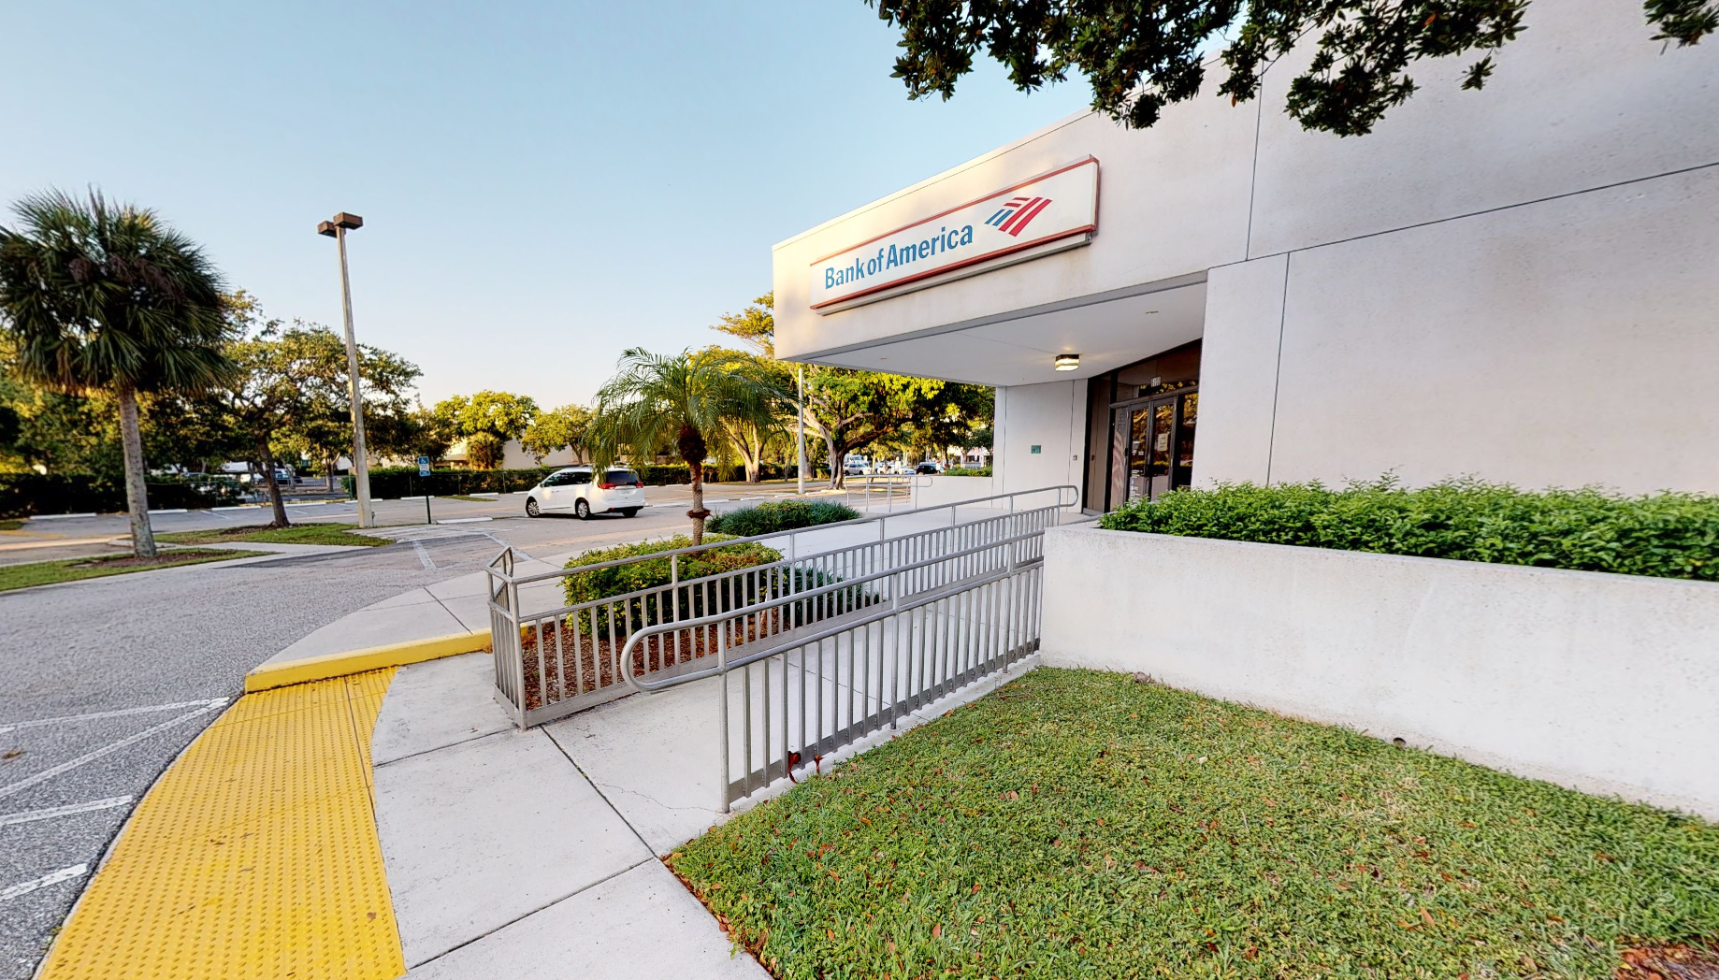 Bank of America financial center with drive-thru ATM | 6100 N Federal Hwy, Fort Lauderdale, FL 33308